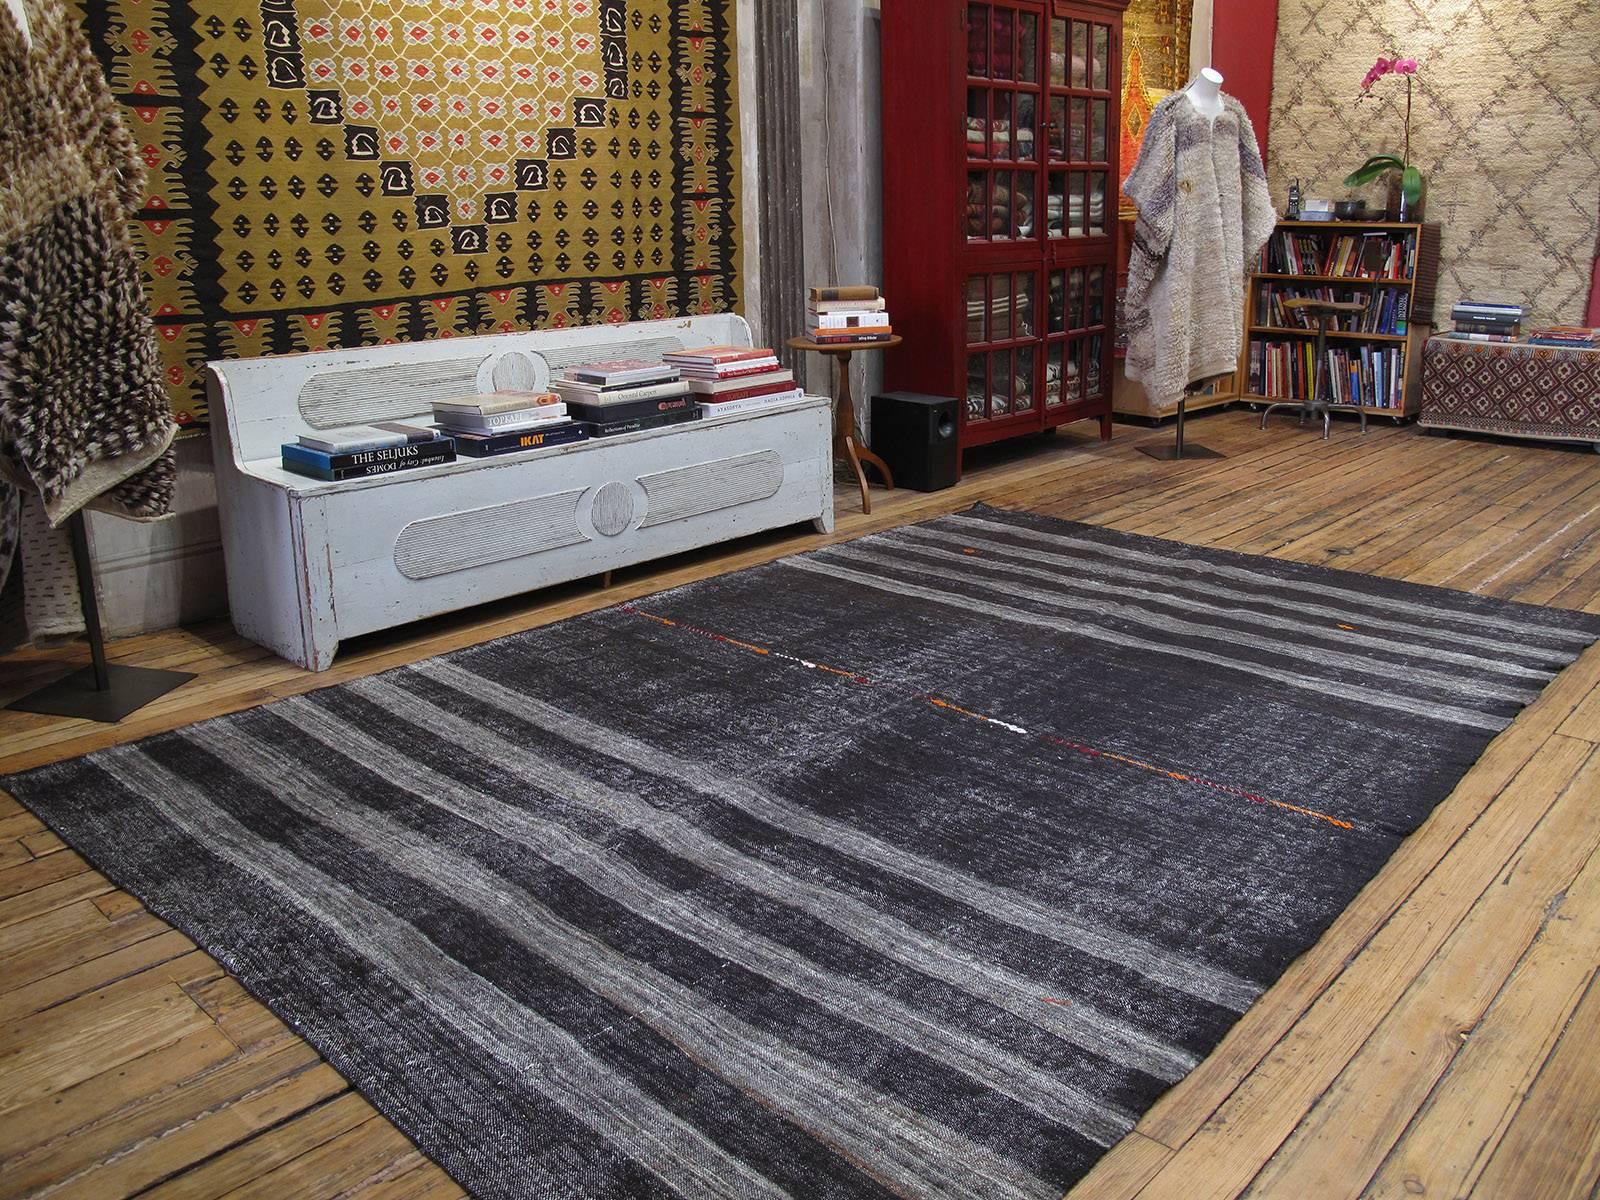 A large, primitive, dramatic tribal flat-weave woven entirely with goat hair in natural dark brown (almost black) and gray bands. Woven as a utilitarian floor cover, it has a rough texture. A line of colorful motifs in the center, woven in brocade,